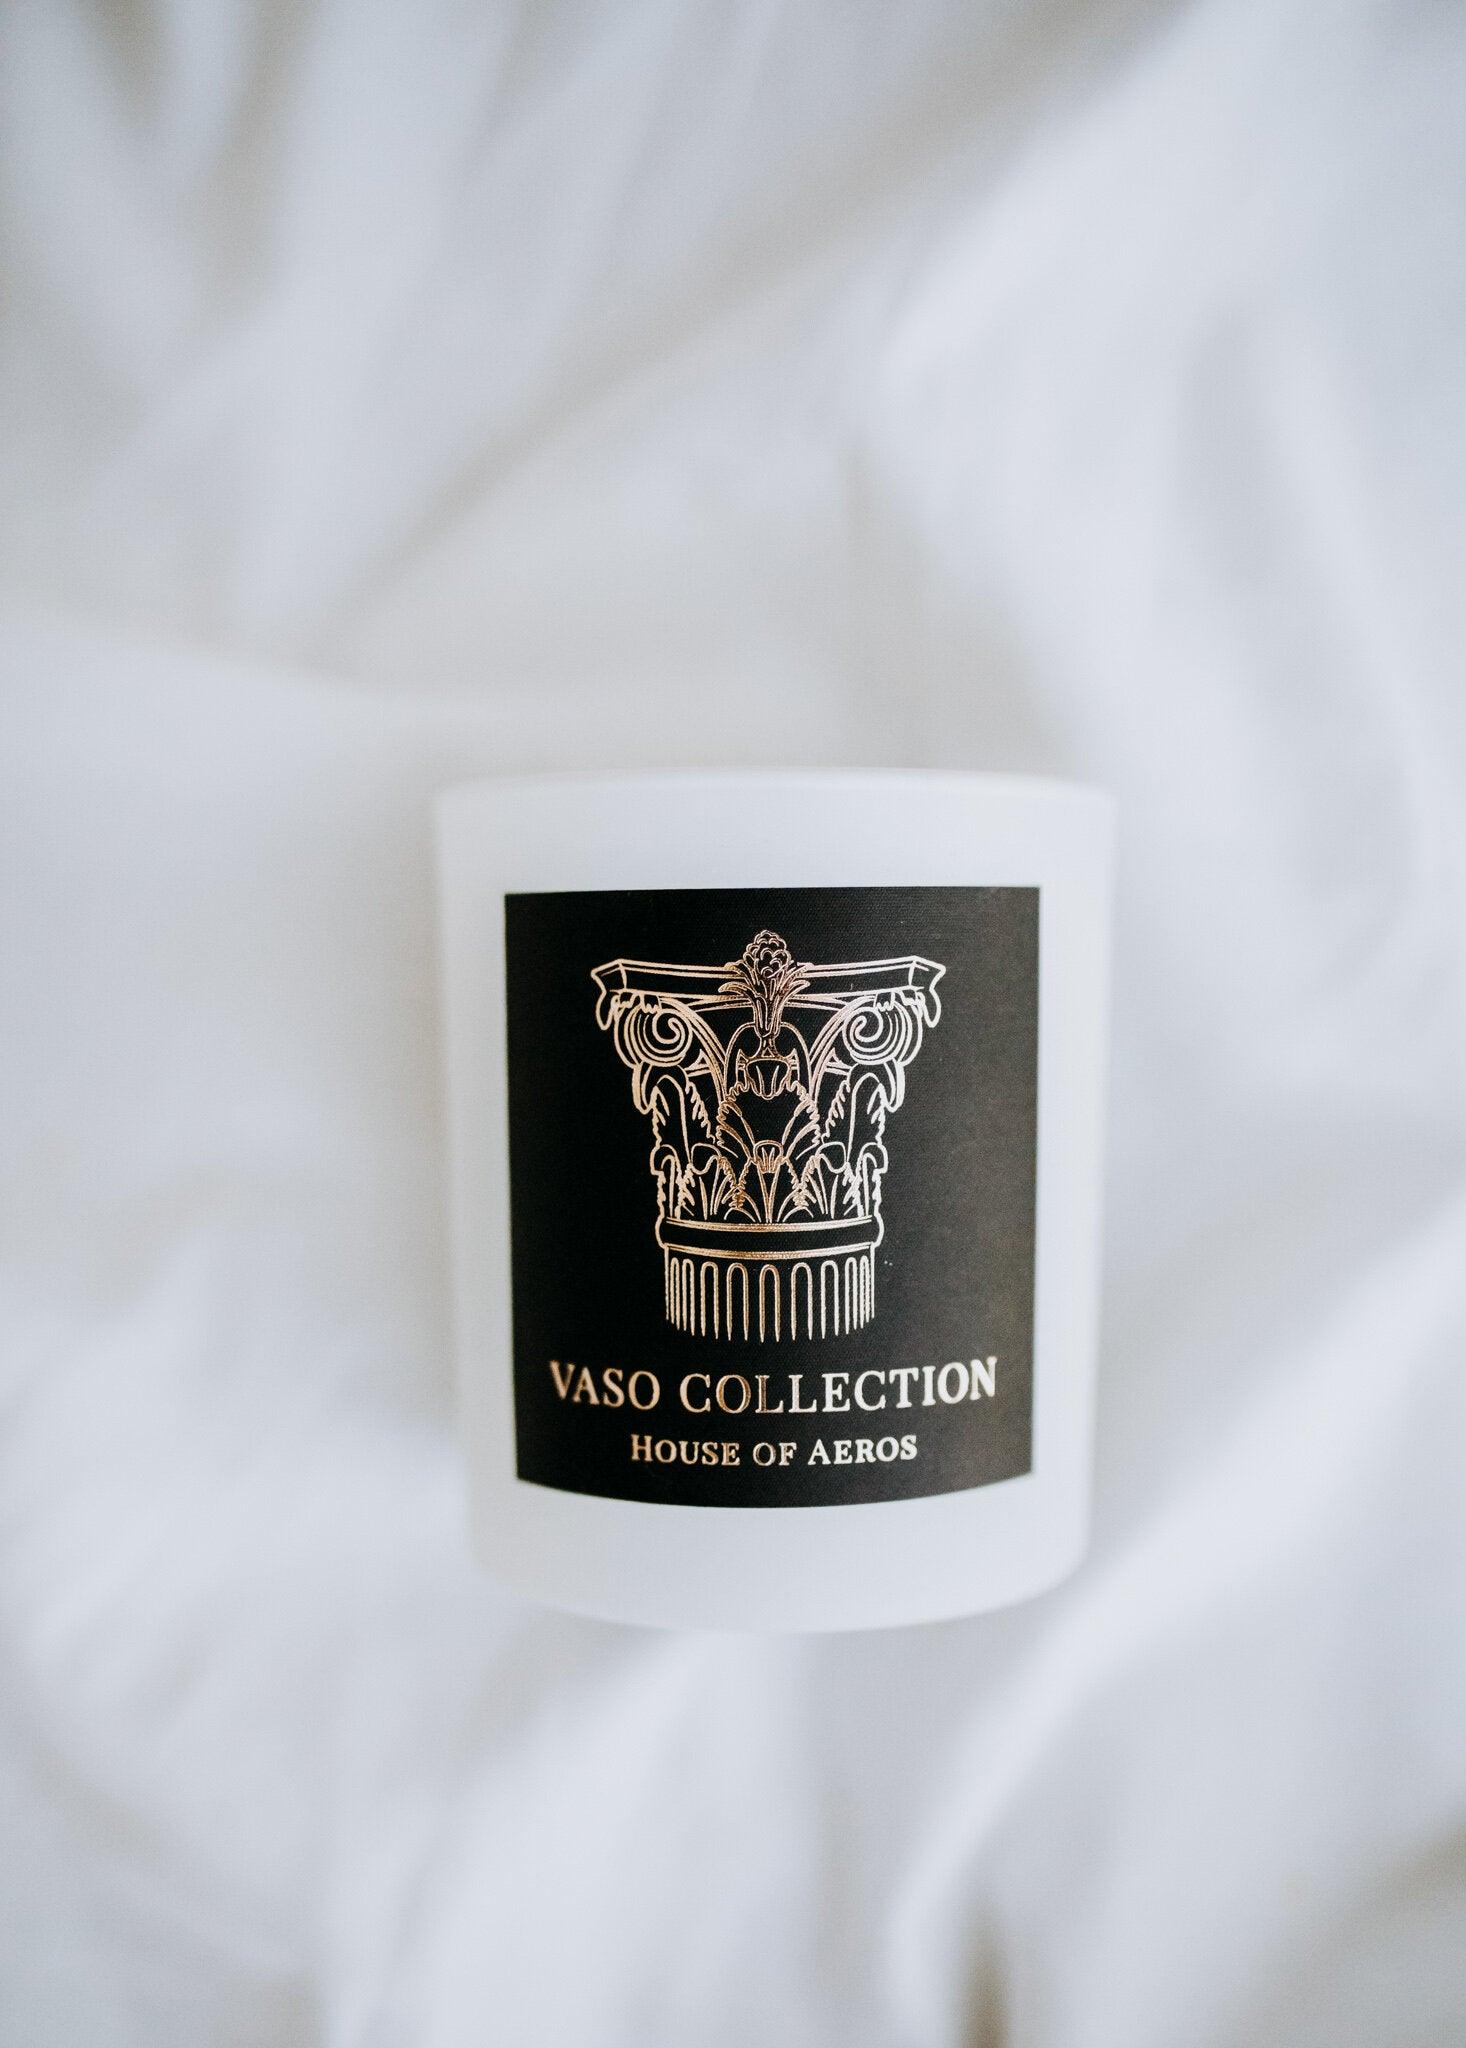 The Vaso Collection - House of Aeros